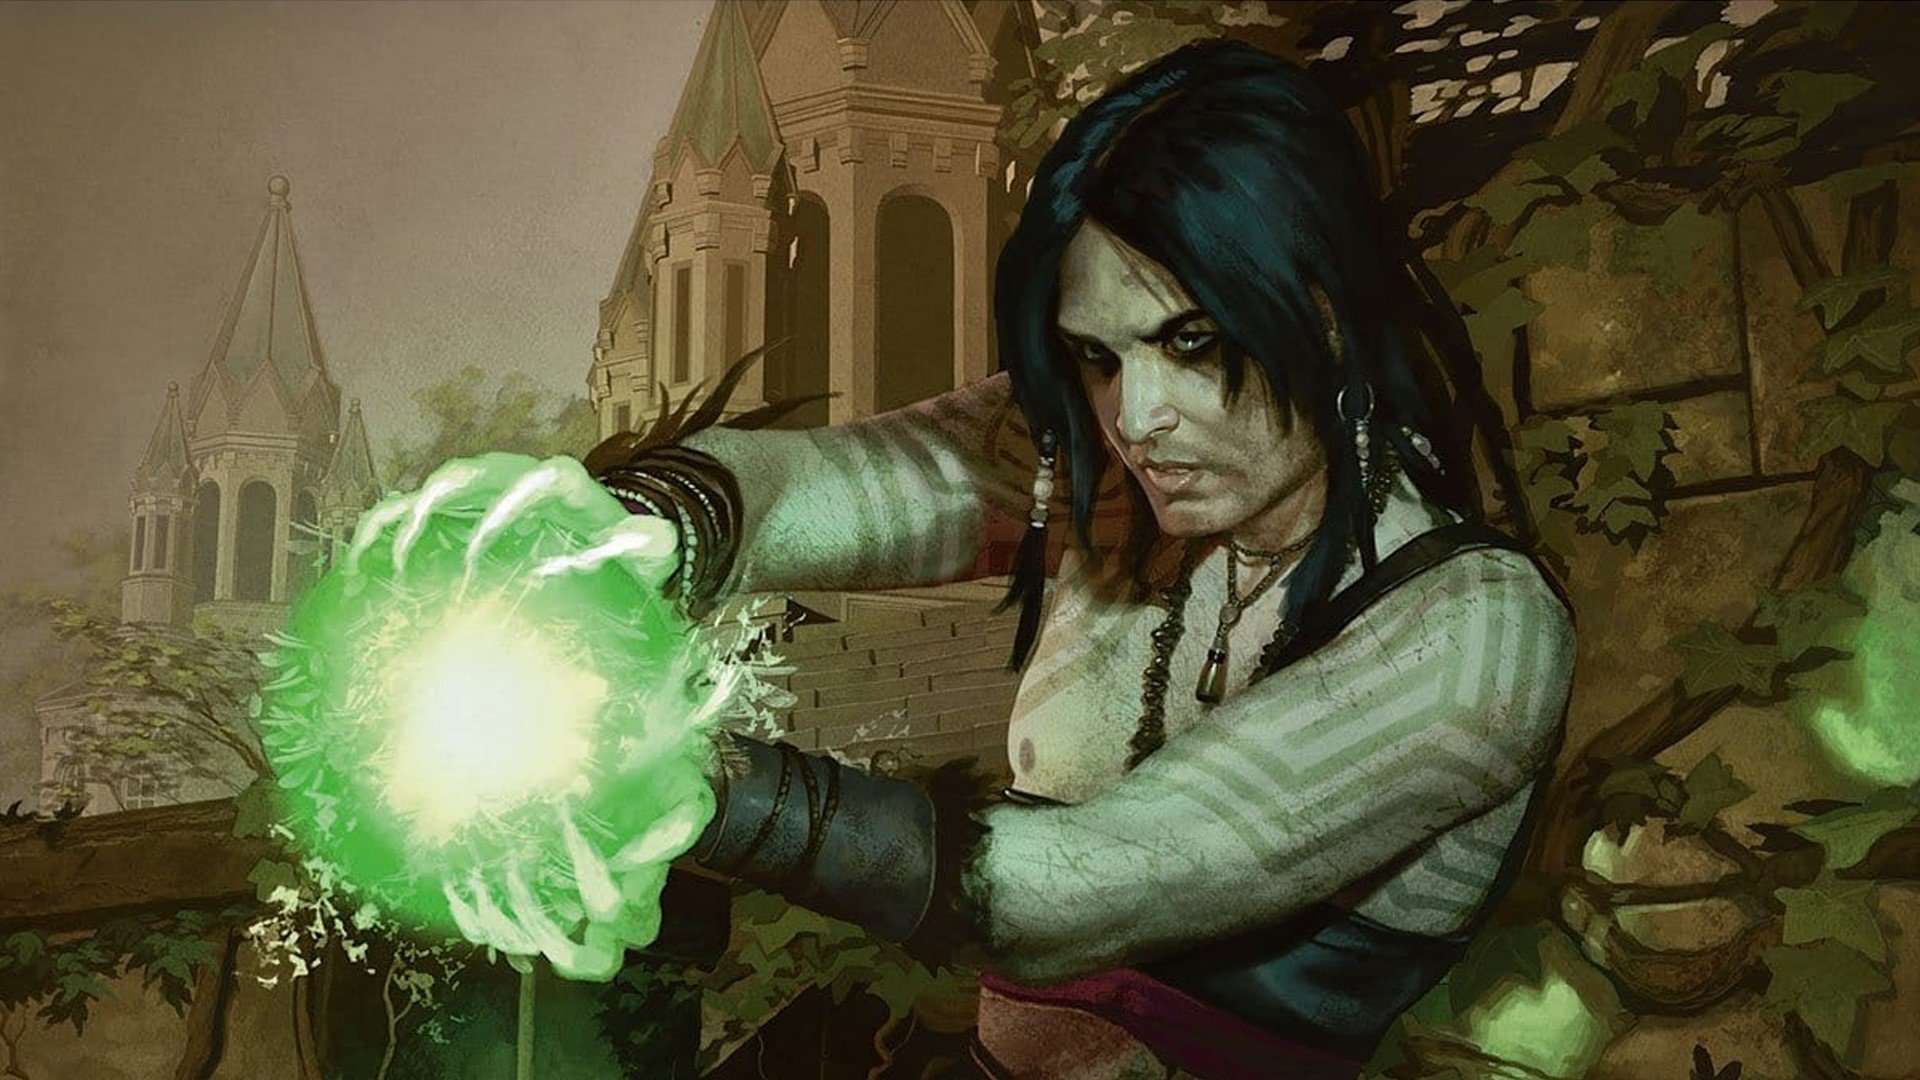 DnD Druid 5E - Wizards of the Coast artwork showing a human druid casting a nature magic spell